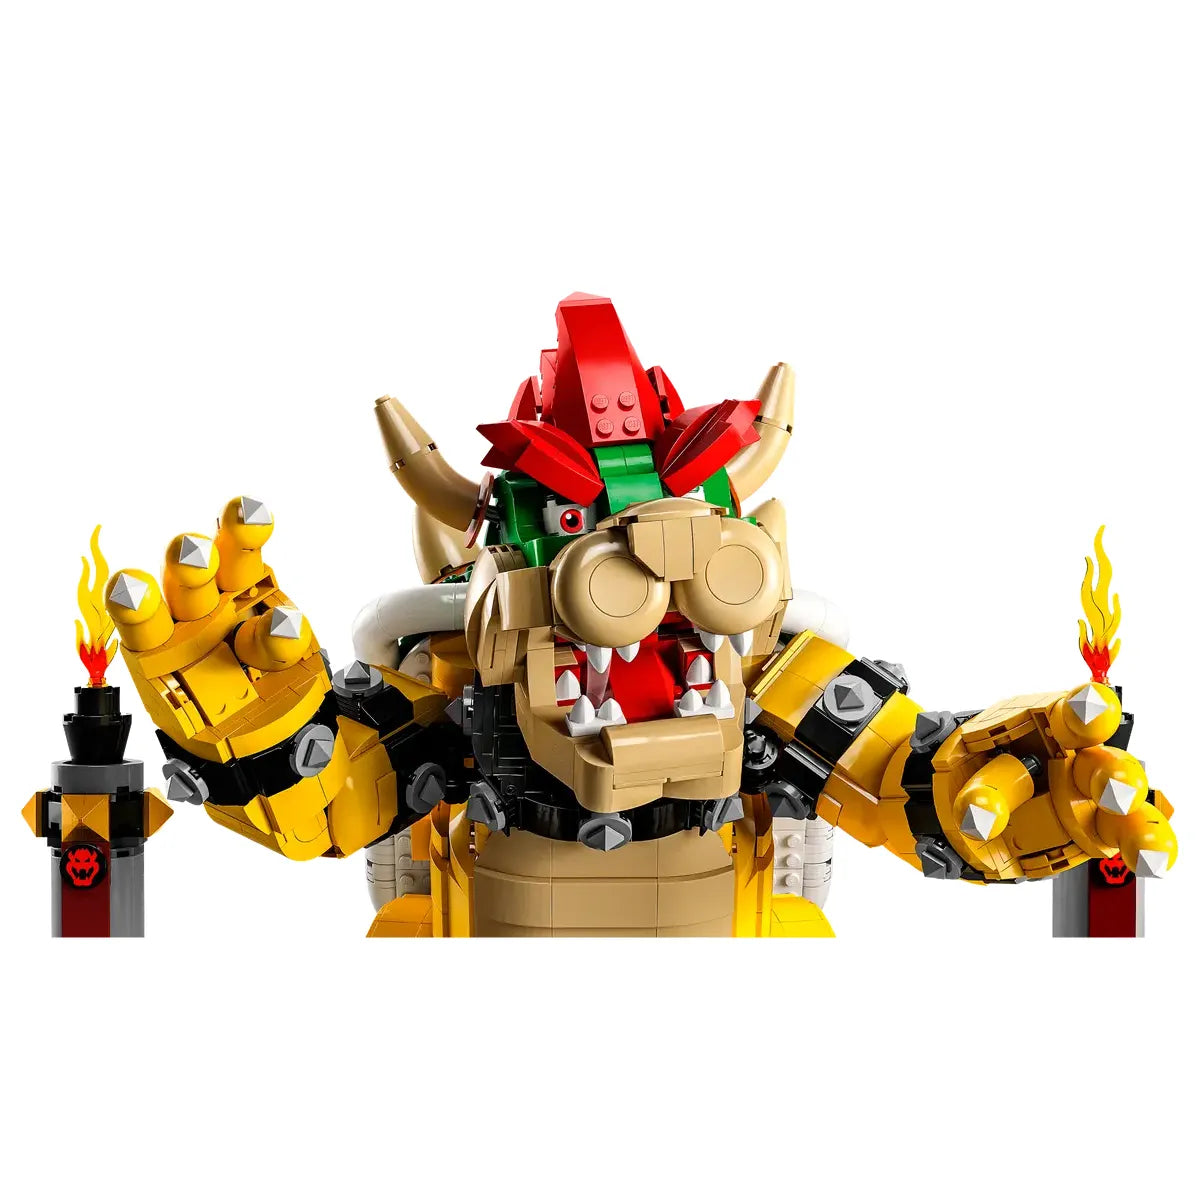 LEGO 71411 Super Mario The Powerful Bowser, Adult Building Model Kit, Collectible 3D Jointed Figure with Battle Base, Gadget Gift Ideas for Men and Women